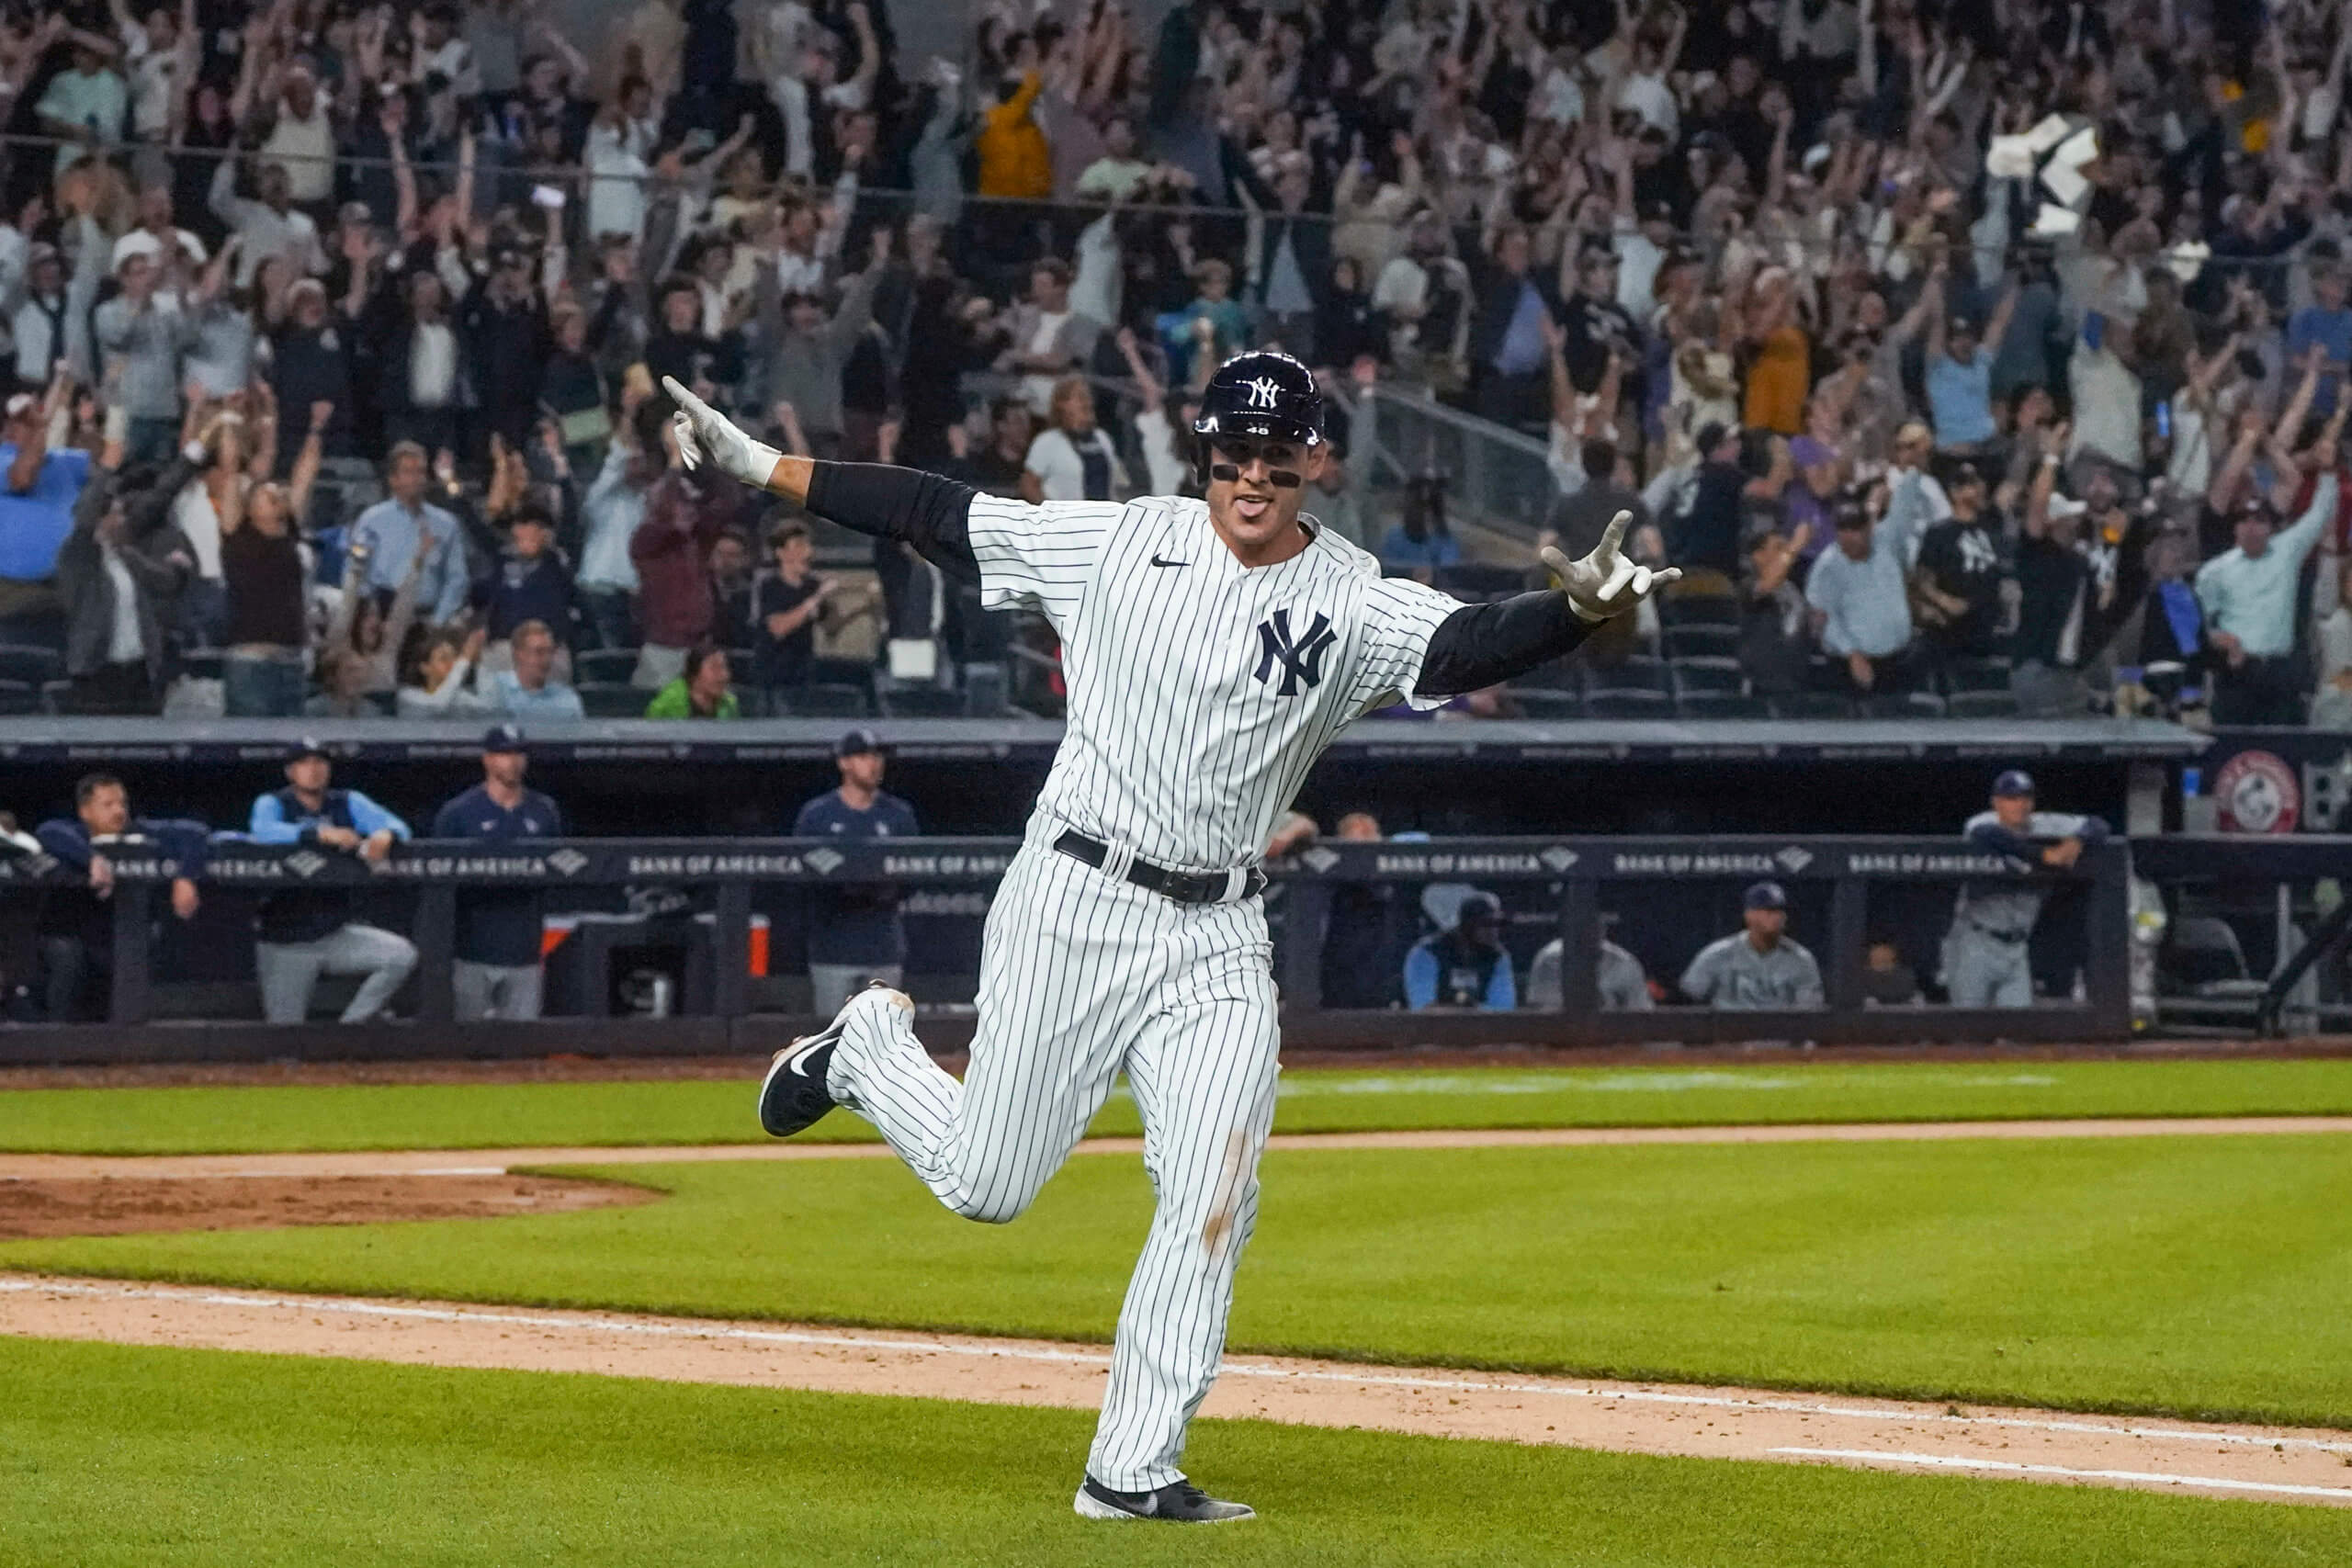 Anthony RIzzo ON FIRE since joining Yankees! (4 hits, 2 home runs